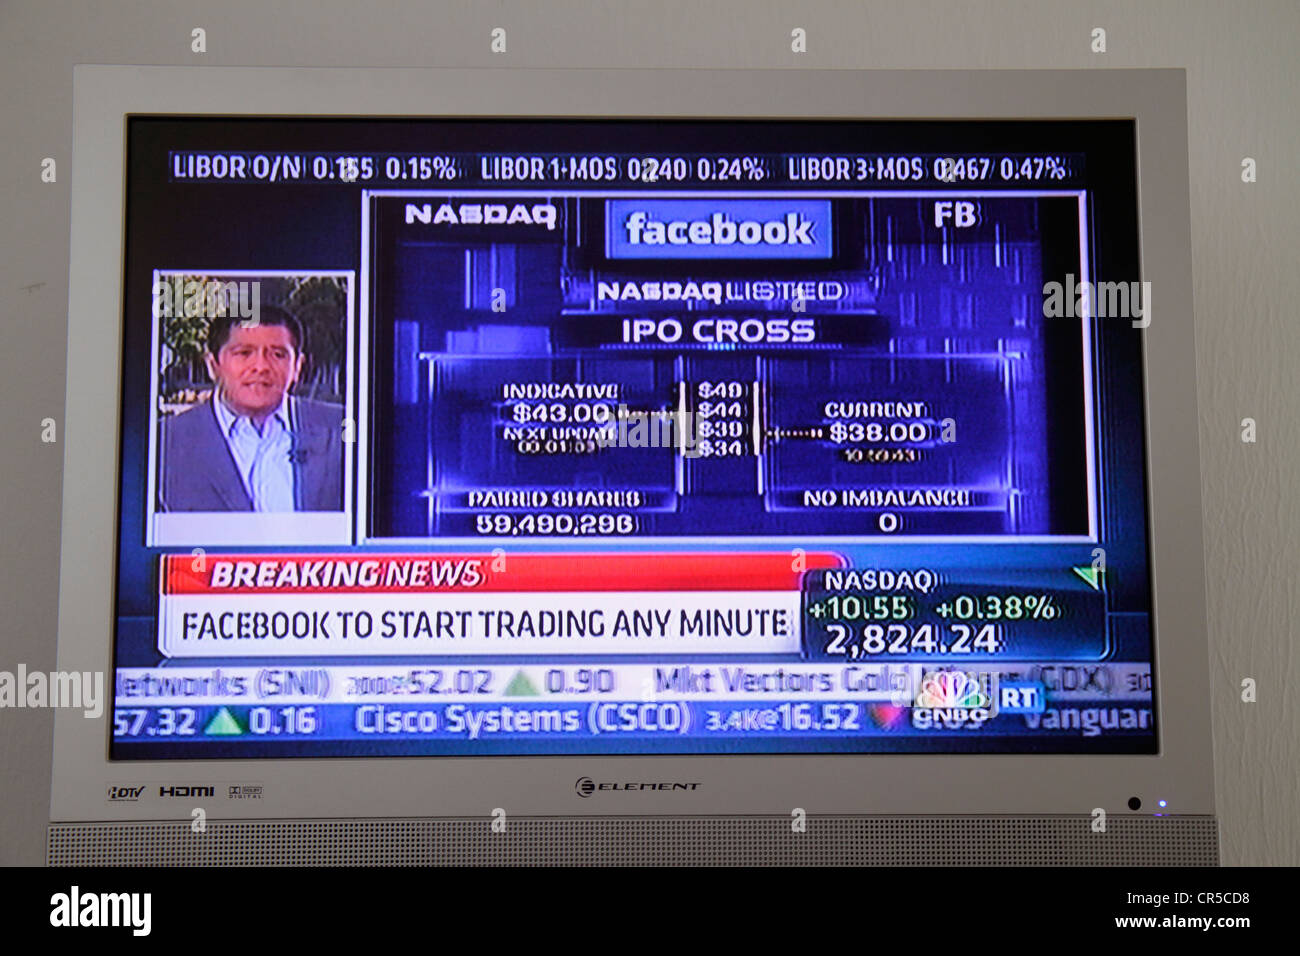 Florida,television,set,TV,cable,channel,HDTV,digital,monitor,CNBC,breaking news,Facebook,FB,IPO,initial public offering,stock market,opening trade,NAS Stock Photo